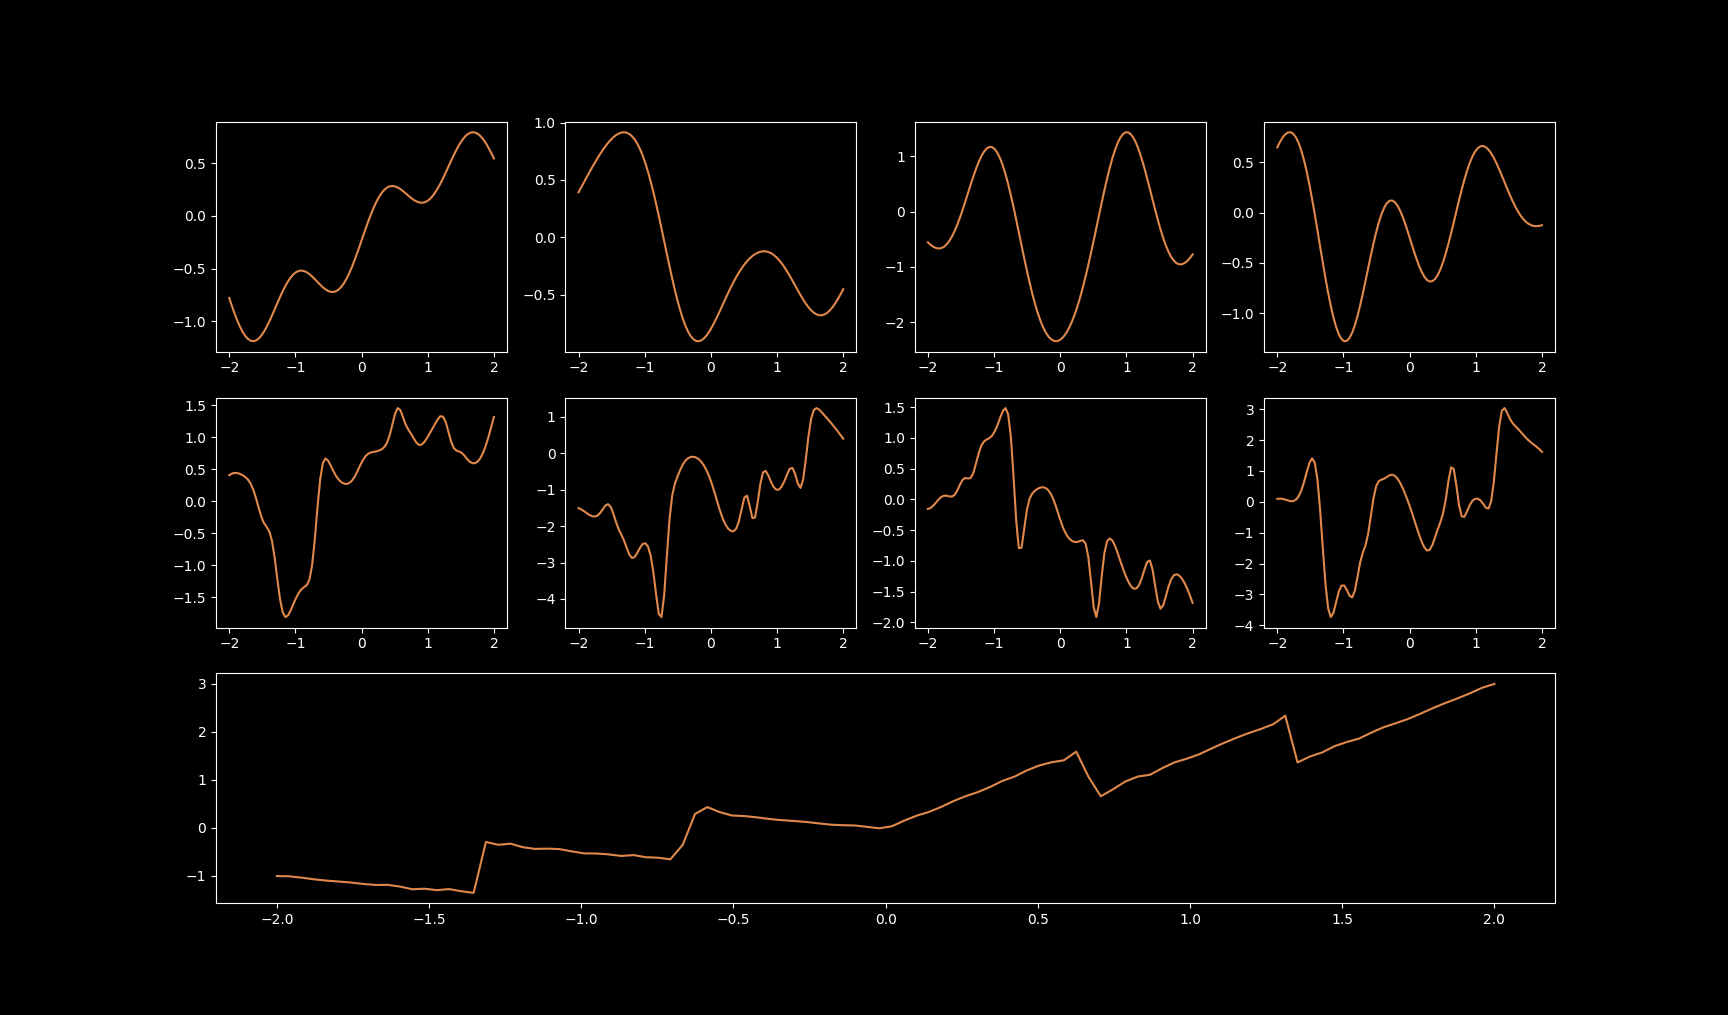 A screenshot of a plot showing a the results of a KAN trained to fit a 1D function.  It shows a orange line labeled "Actual" making a zigzag pattern along with an orange line labeled "Predicted" which follows the orange one pretty closely, but with some inaccuracy especially near sharp turns.